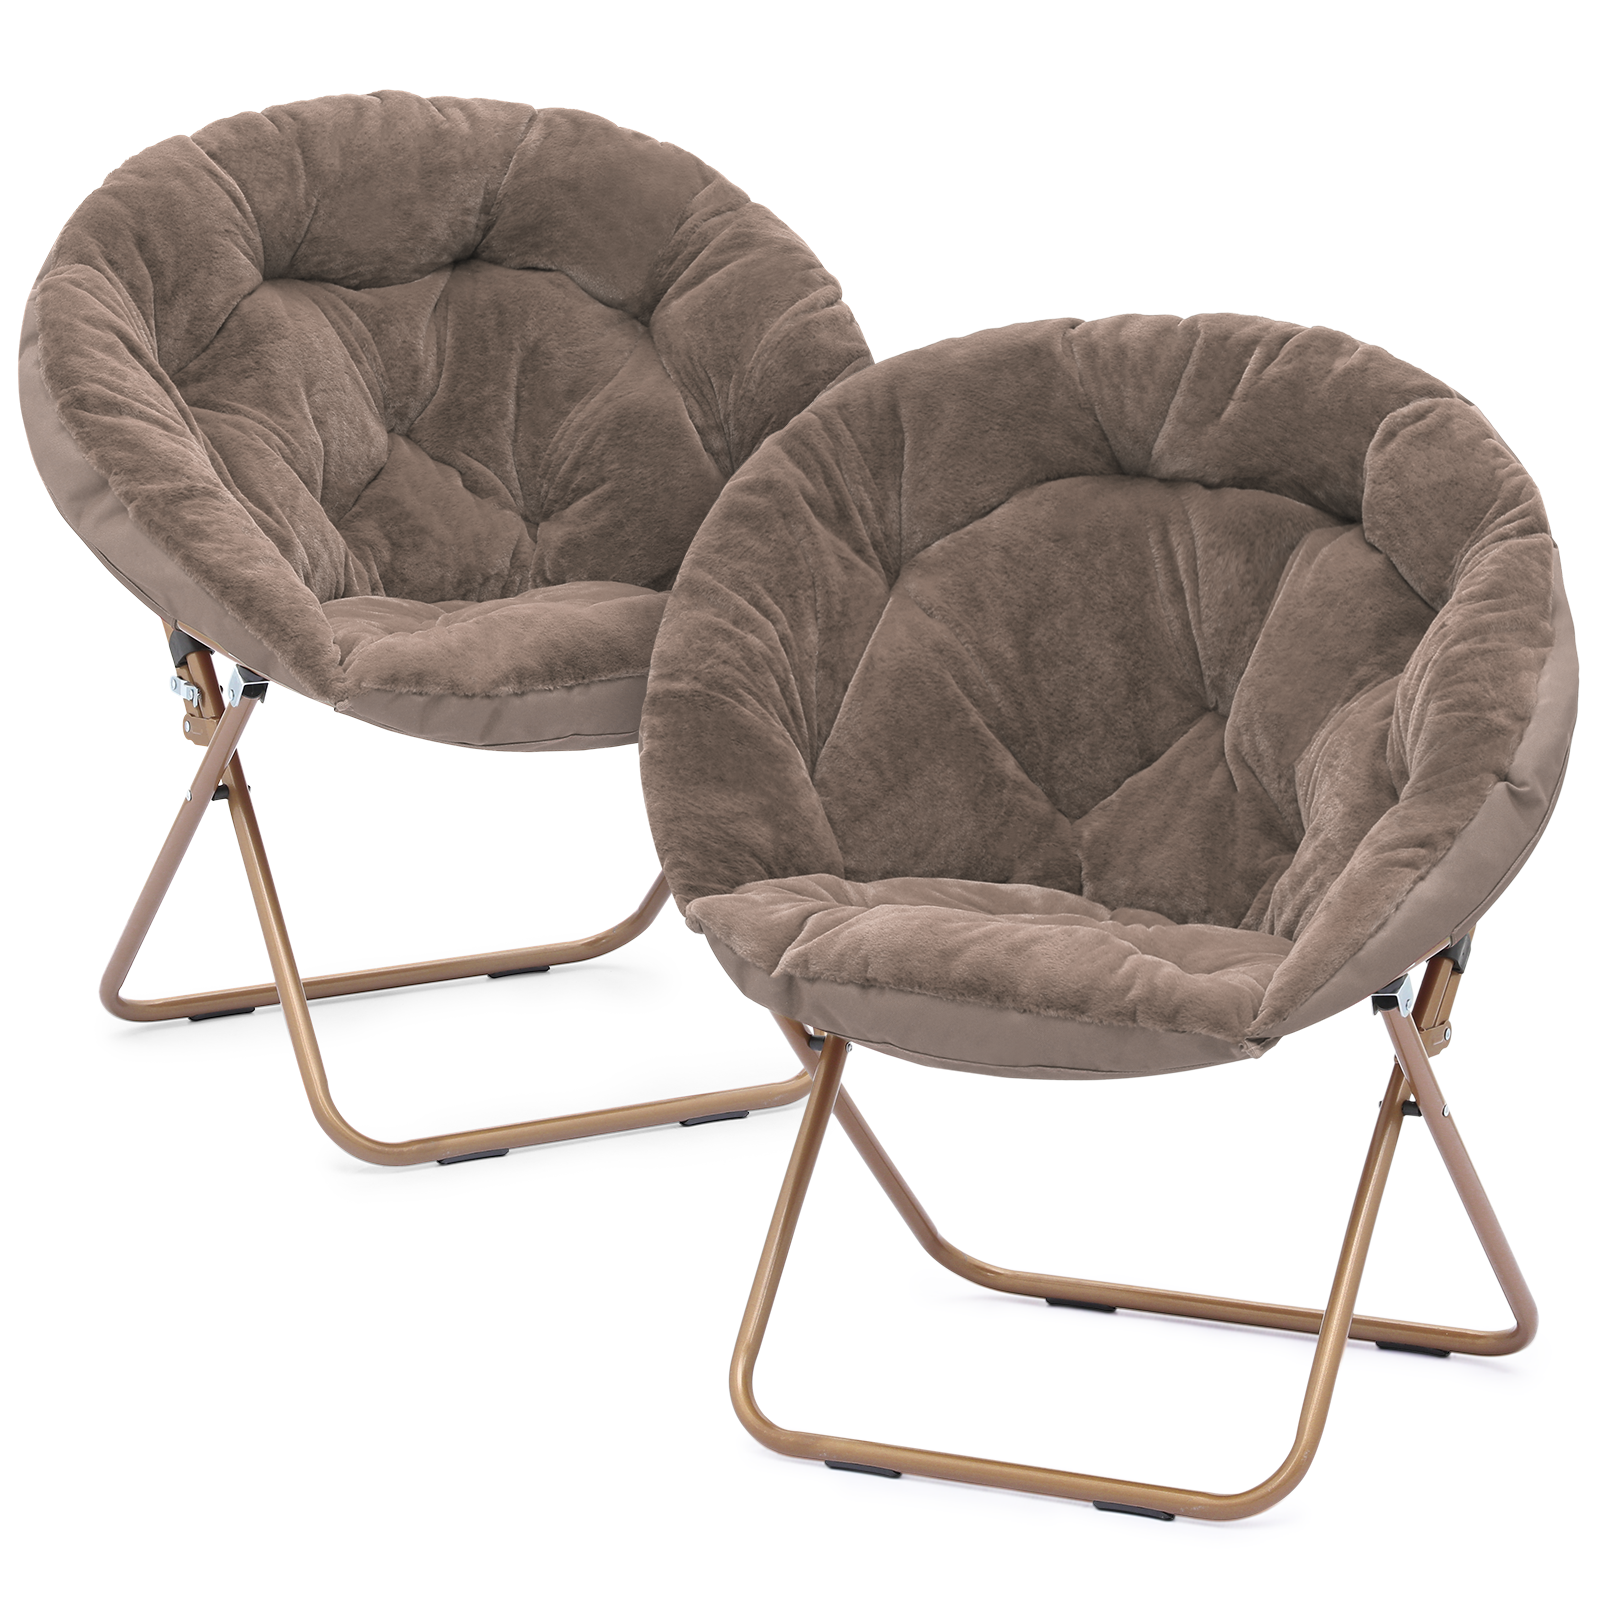 Magshion Set of 2 Comfy Saucer Chair, Foldable Faux Fur Lounge Chair for Bedroom Living Room, Cozy Moon Chair with Metal Frame for Adults, X-Large, Beige - image 1 of 10